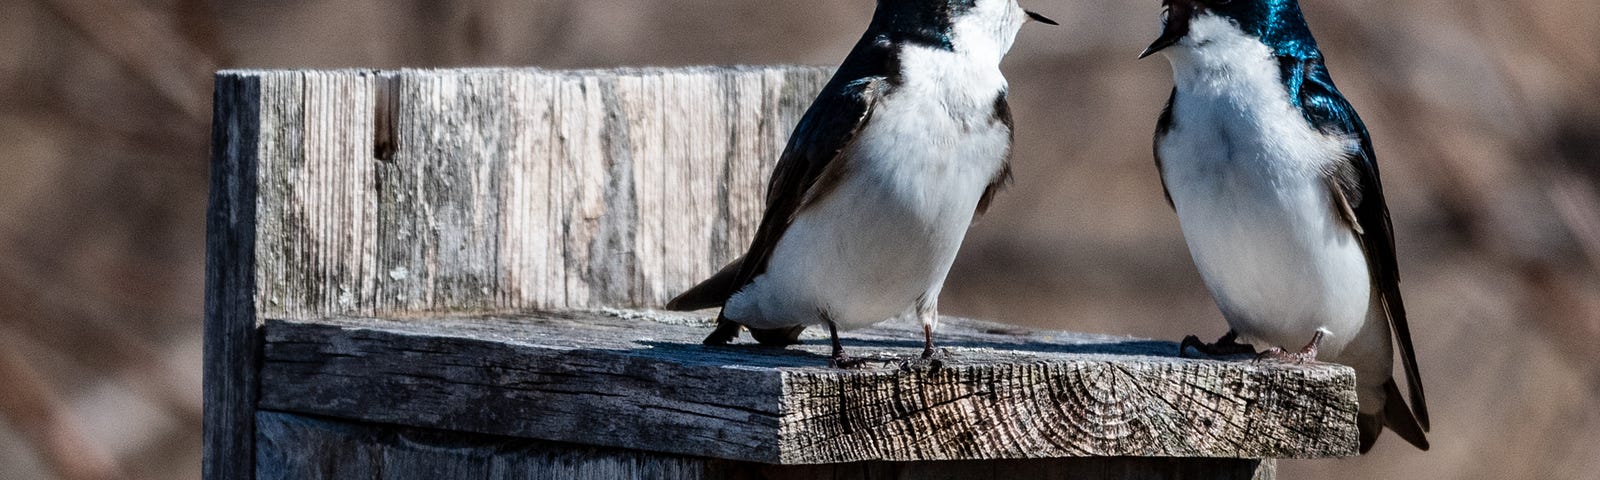 Tree swallows seem to be talking with each other.